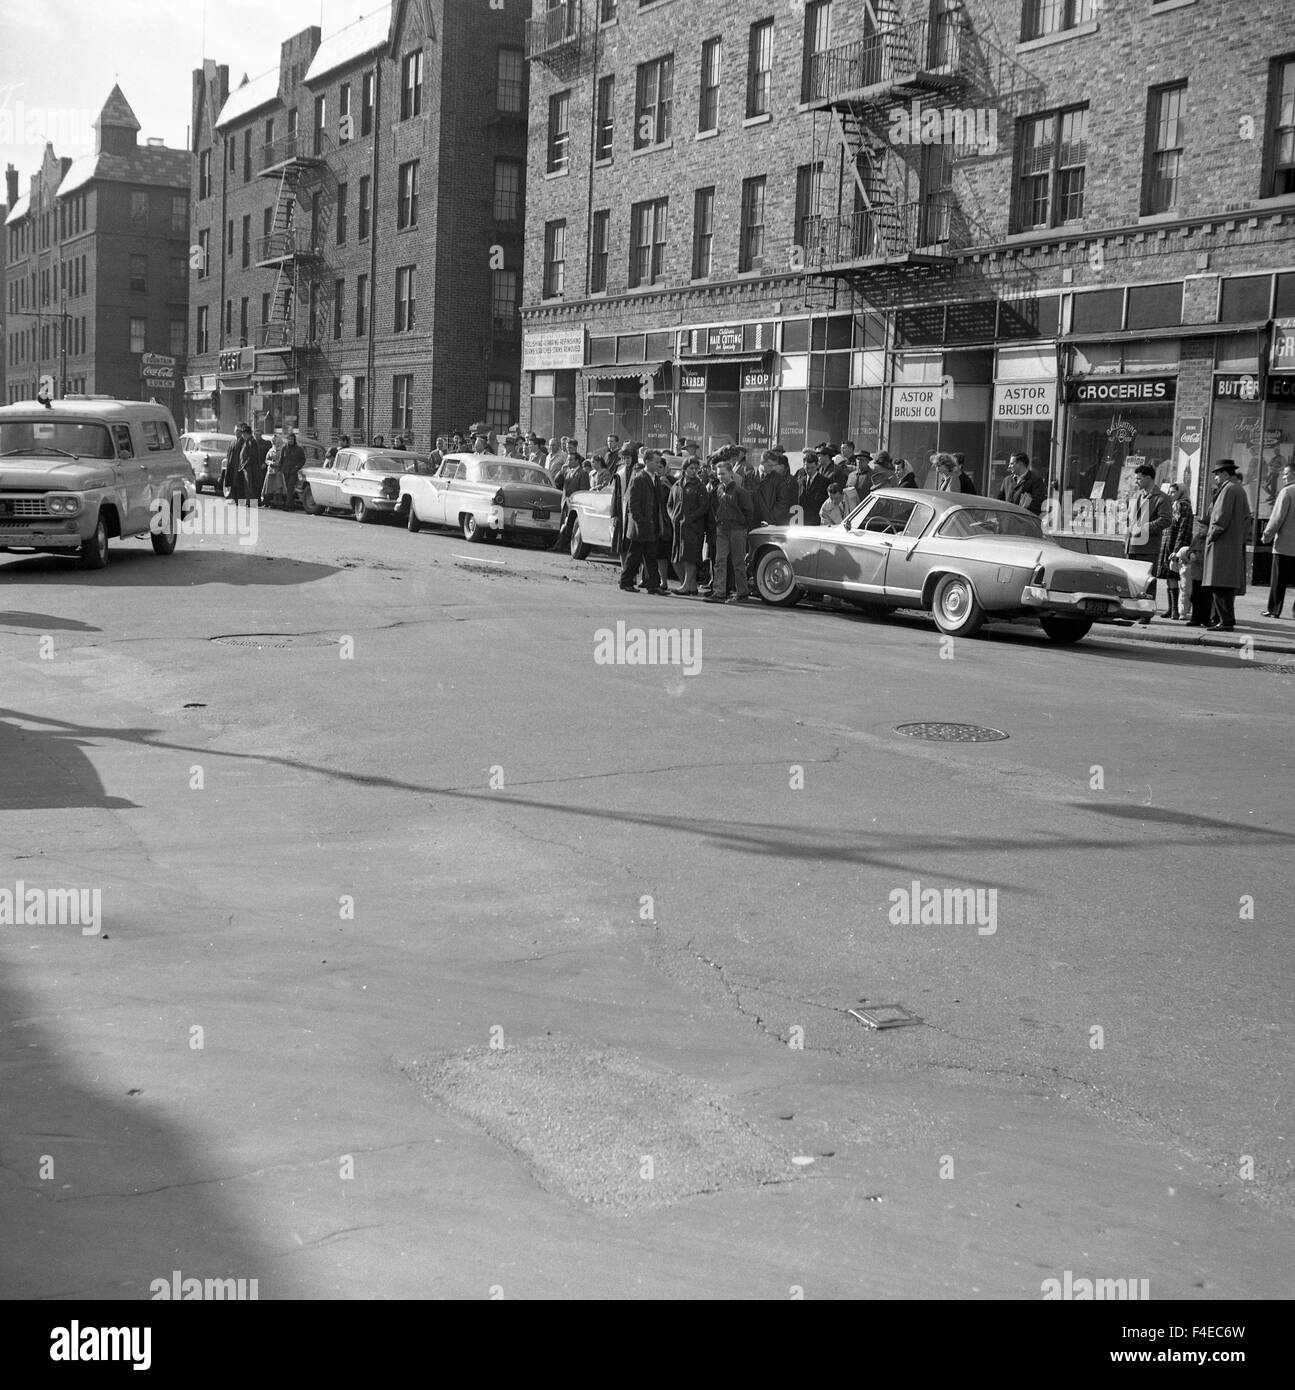 bystanders watching at scene - 1950s cars men wearing hats Stock Photo